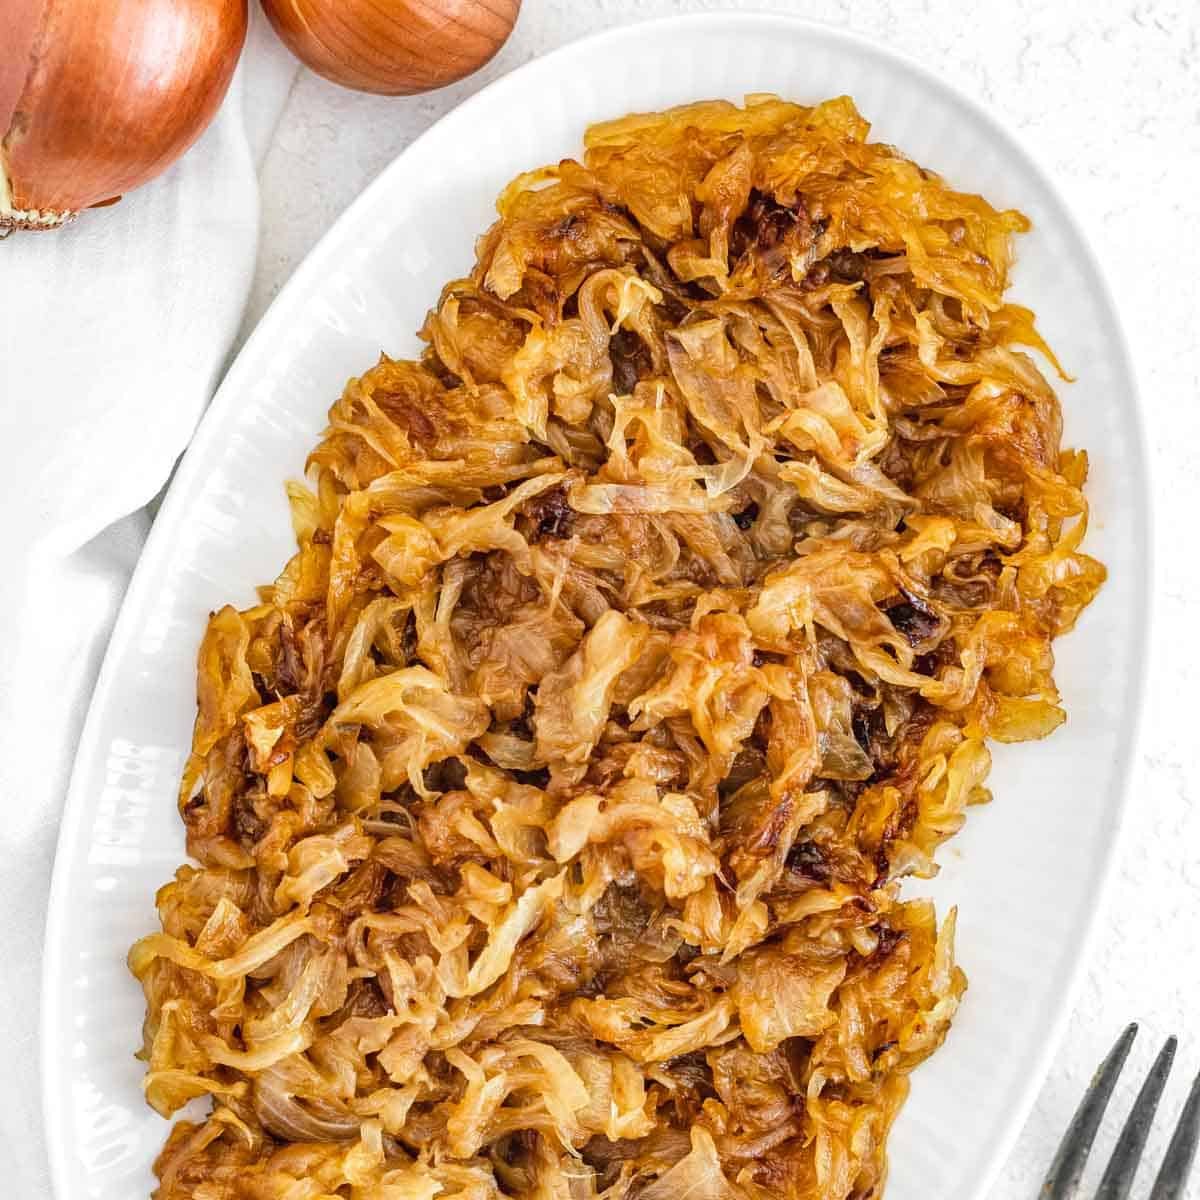 Caramelized onions on a platter